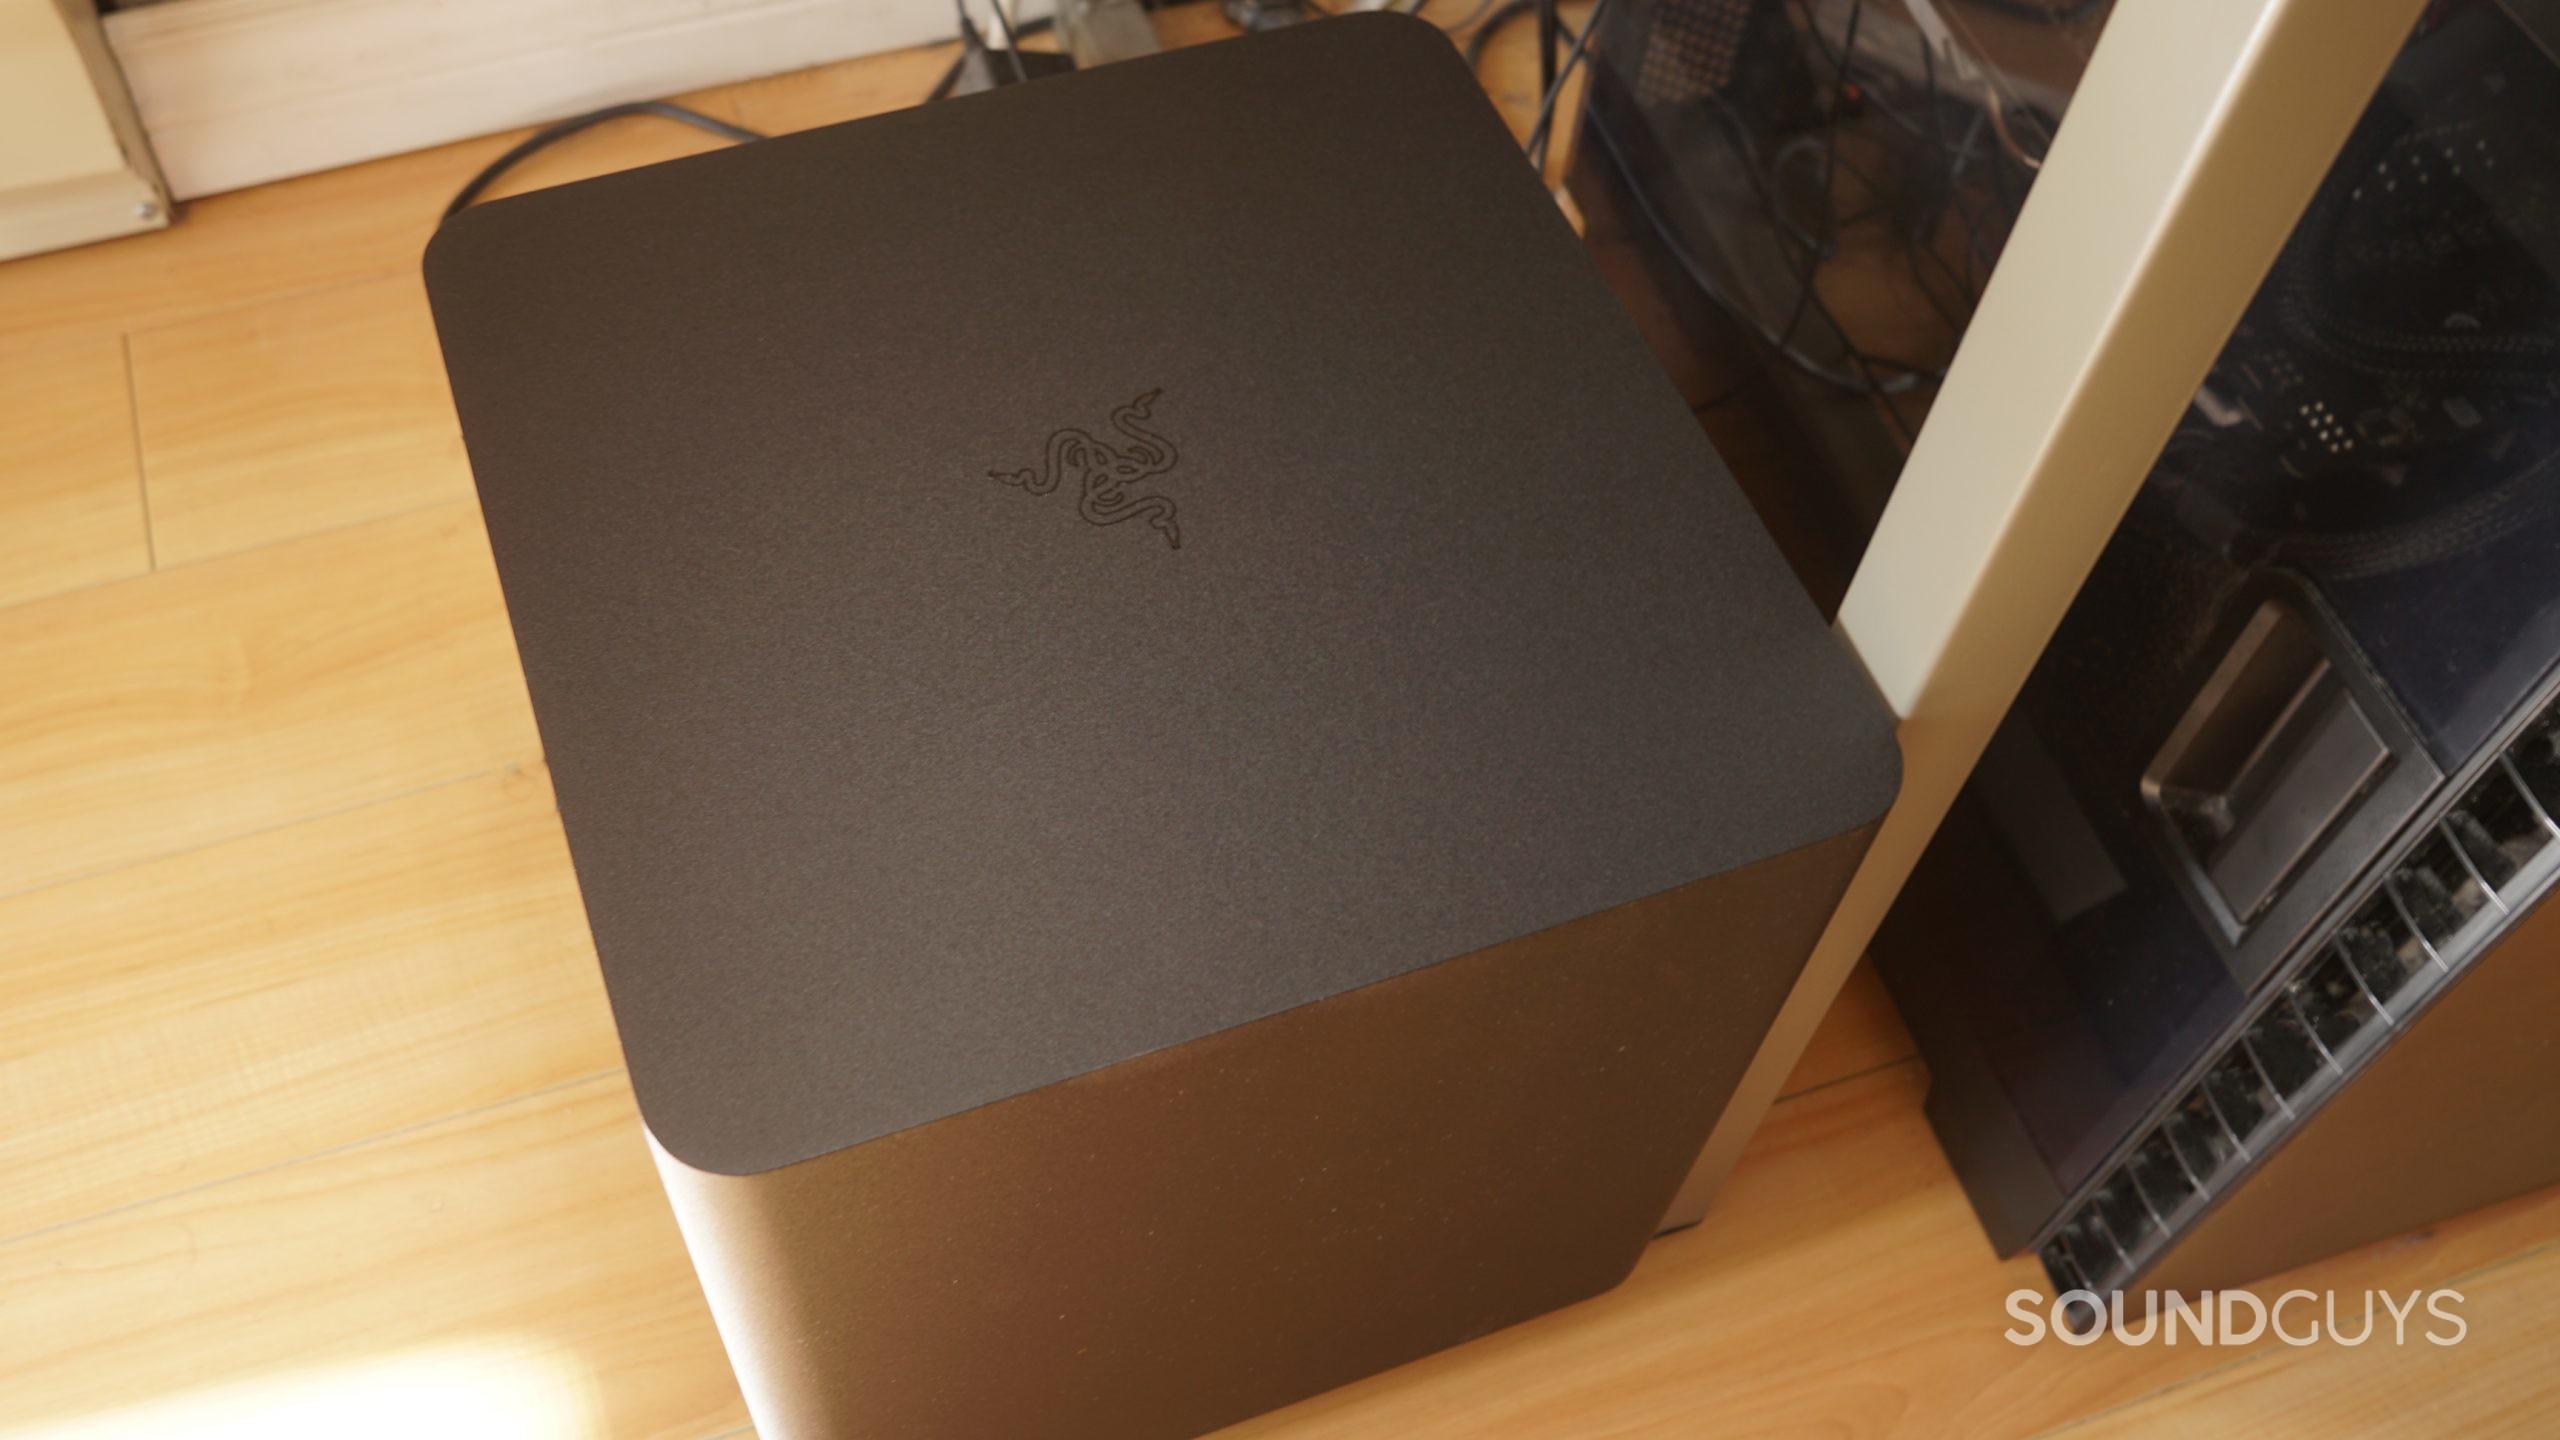 The Razer Leviathan V2 Pro woofer is plugged in under a desk, next to a Windows PC tower.